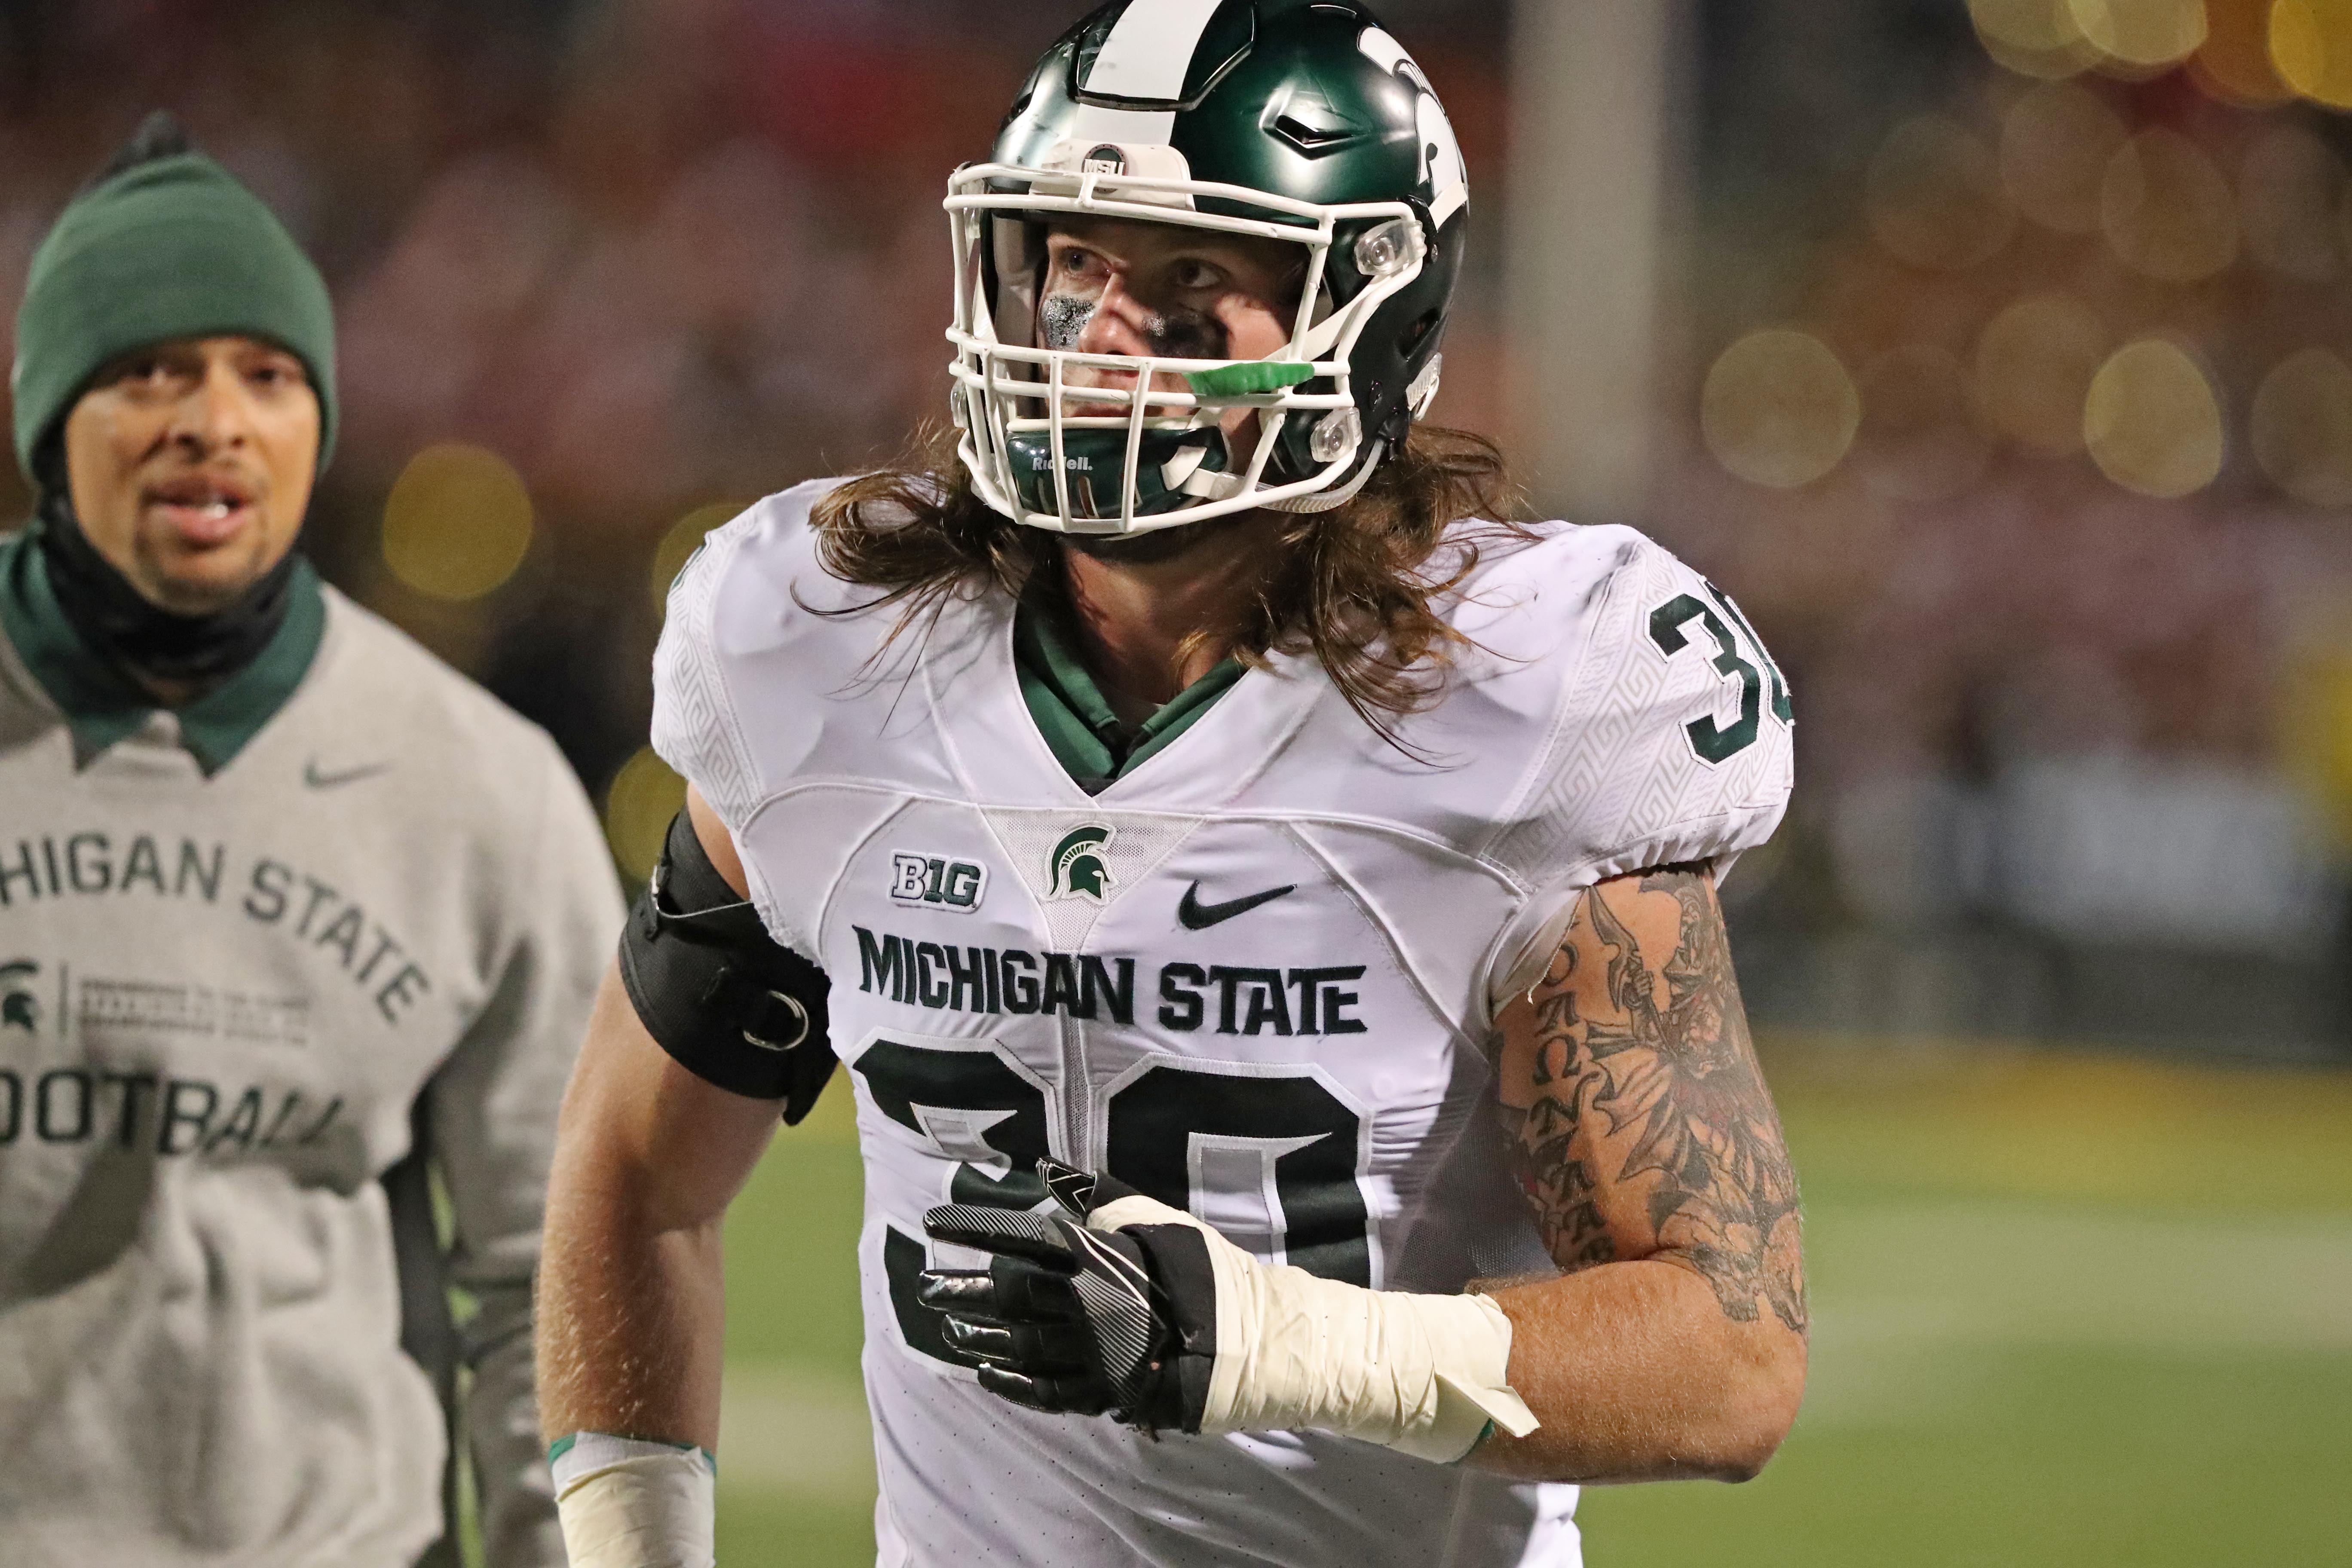 Oct 22, 2016; College Park, MD, USA; Michigan State Spartans linebacker Riley Bullough (30) is ejected from the game in the first quarter against the Maryland Terrapins at Byrd Stadium. Mandatory Credit: Mitch Stringer-USA TODAY Sports